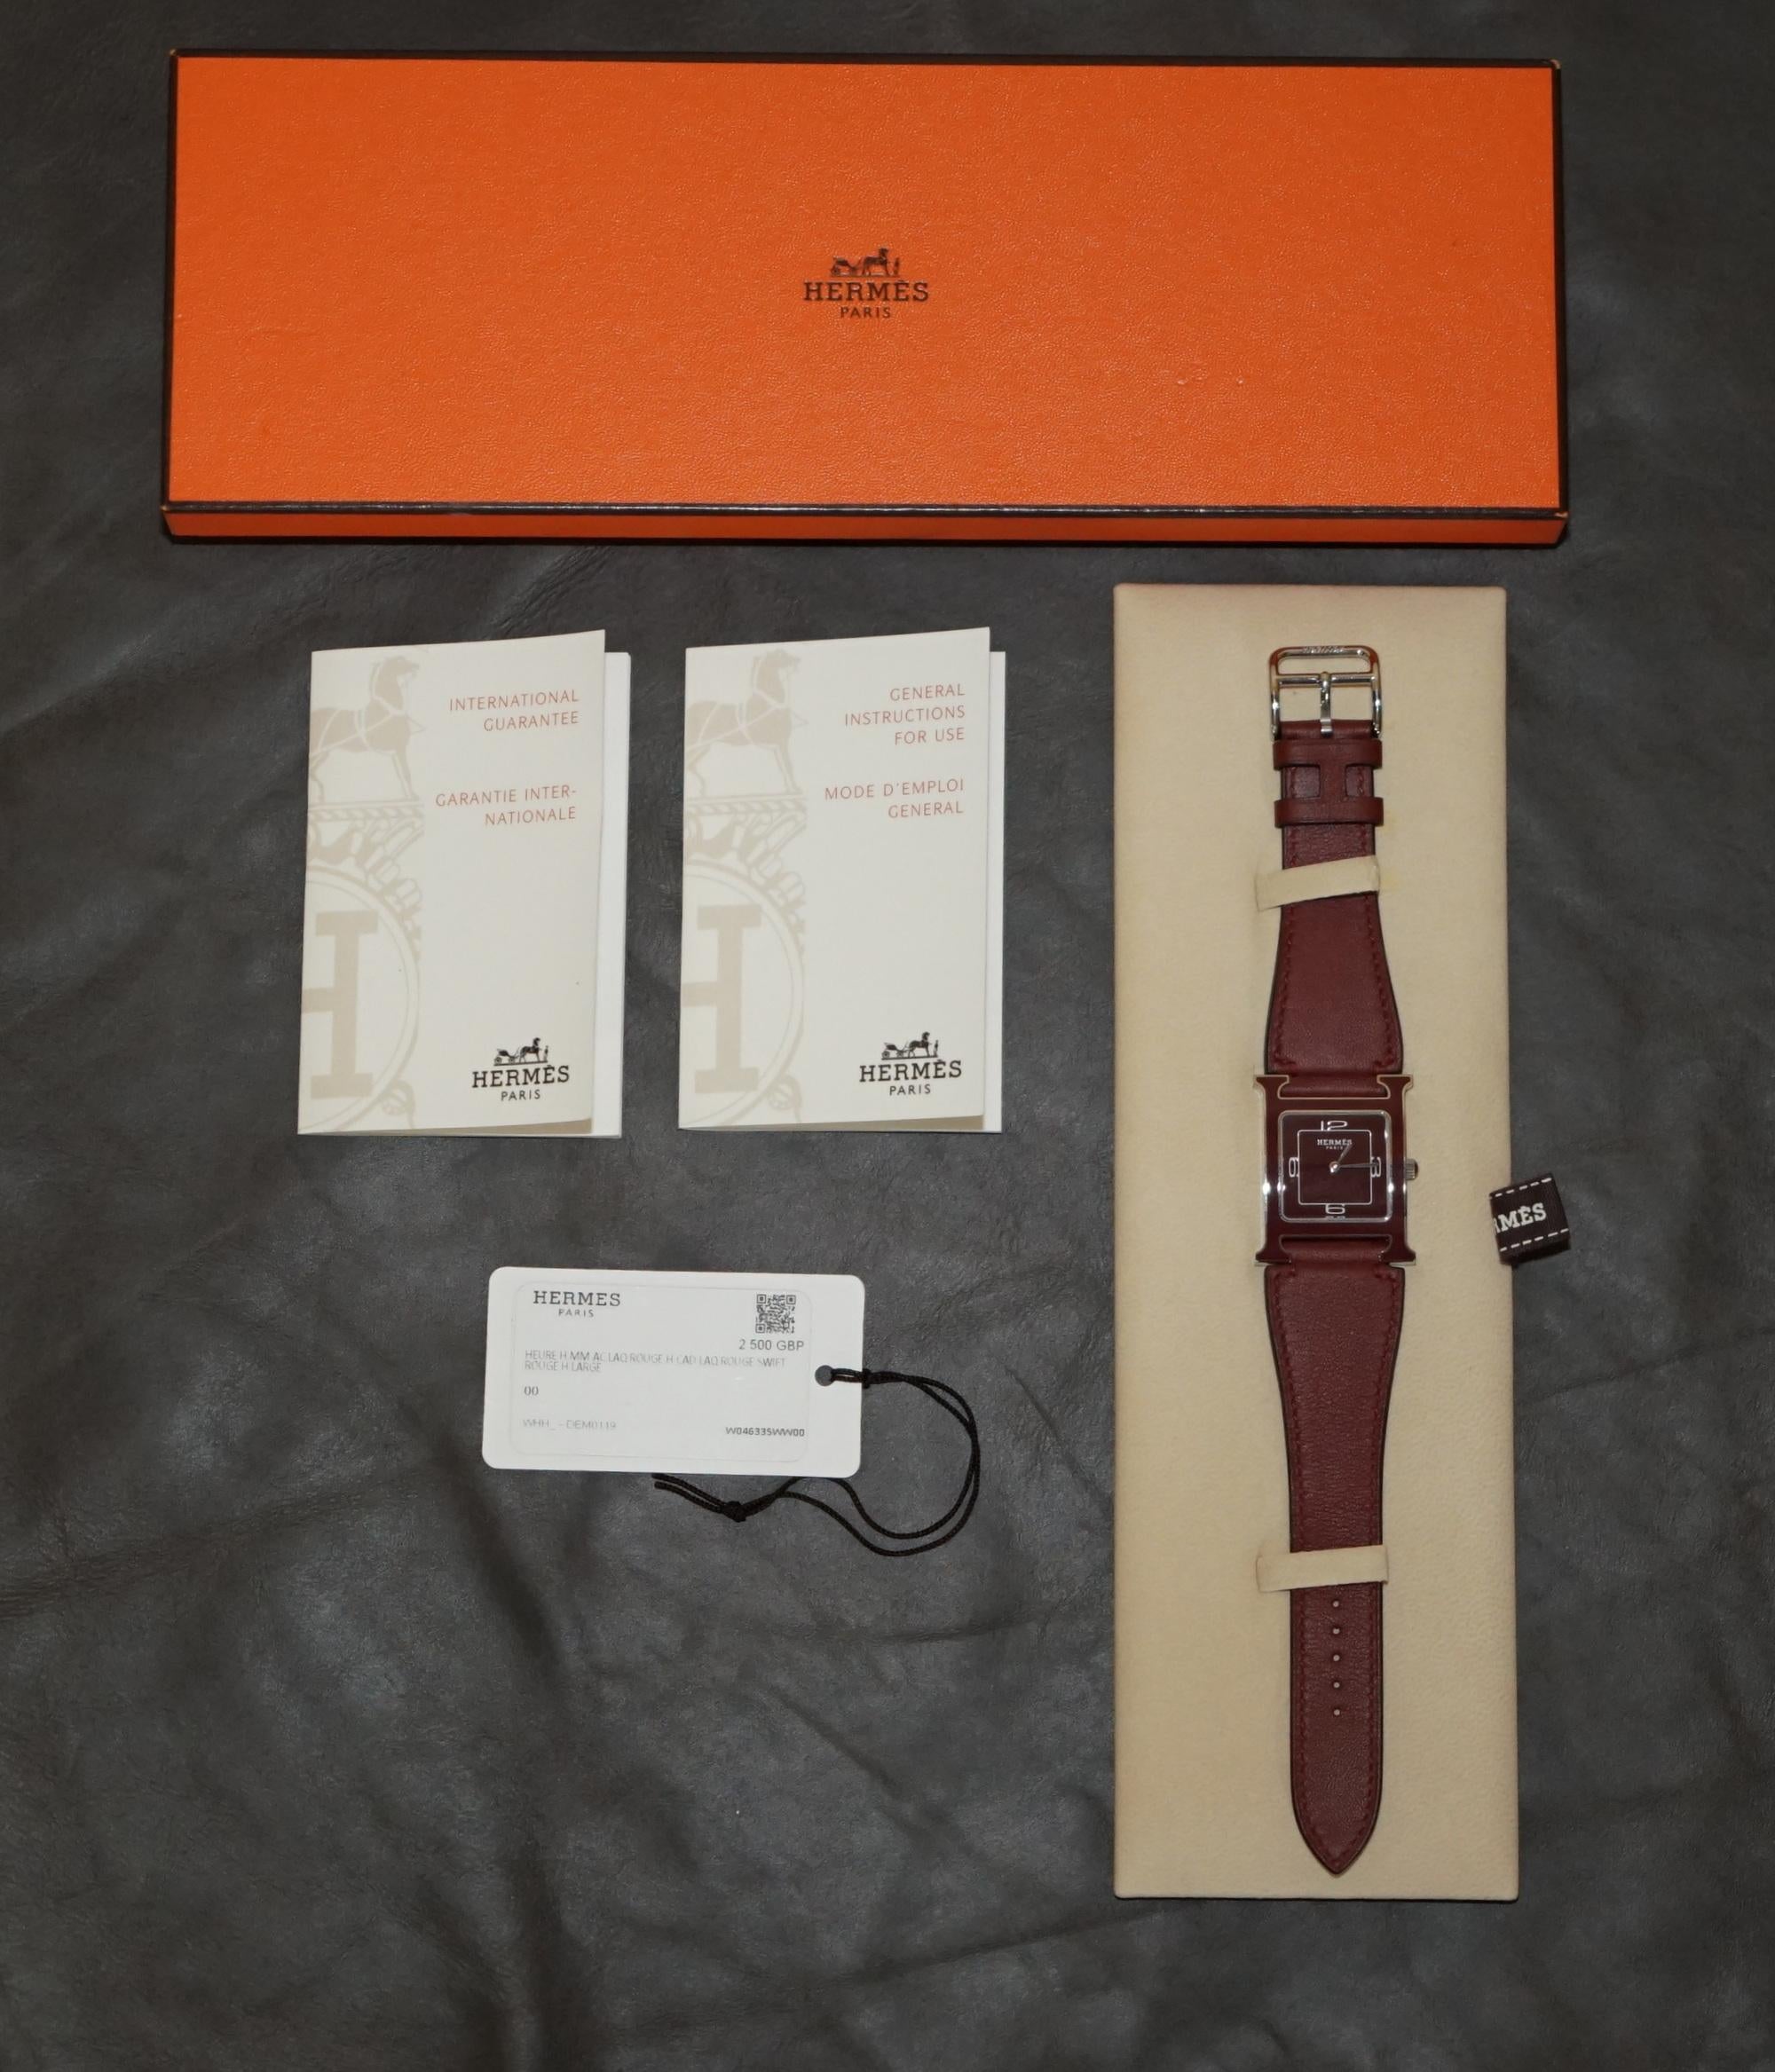 Royal House Antiques

Royal House Antiques is delighted to offer for sale this brand new in the original box never worn Hermes Heure H Laq Rouge Swift Reference HH1.523 / W046335WW00 complete with the original box papers and swing tag

This is a